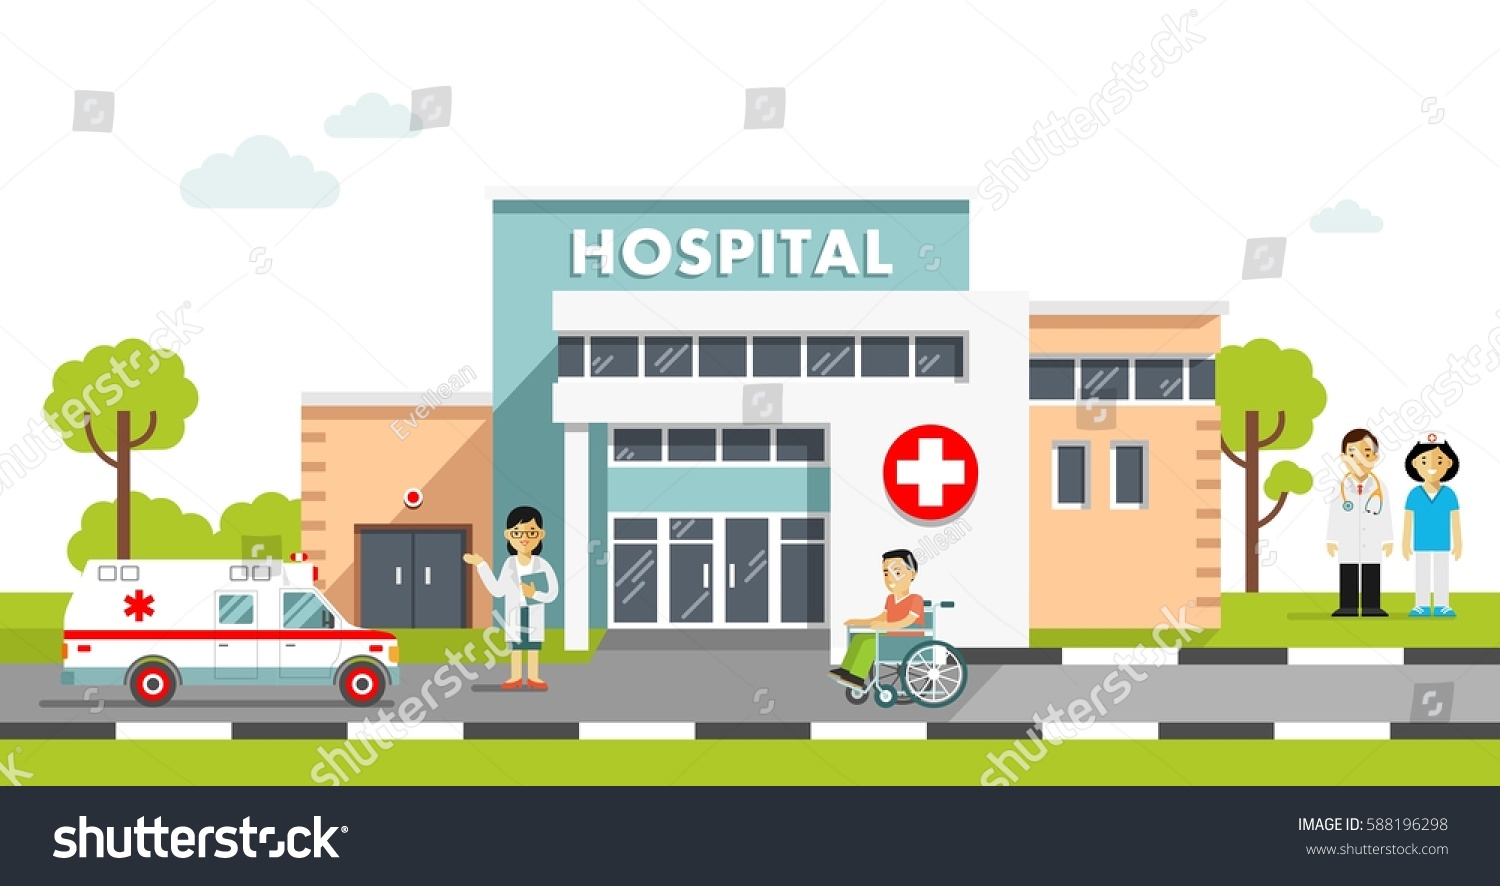 stock-vector-medical-concept-with-hospital-building-and-doctor-in-flat-style-panoramic-background-with-hospital-588196298